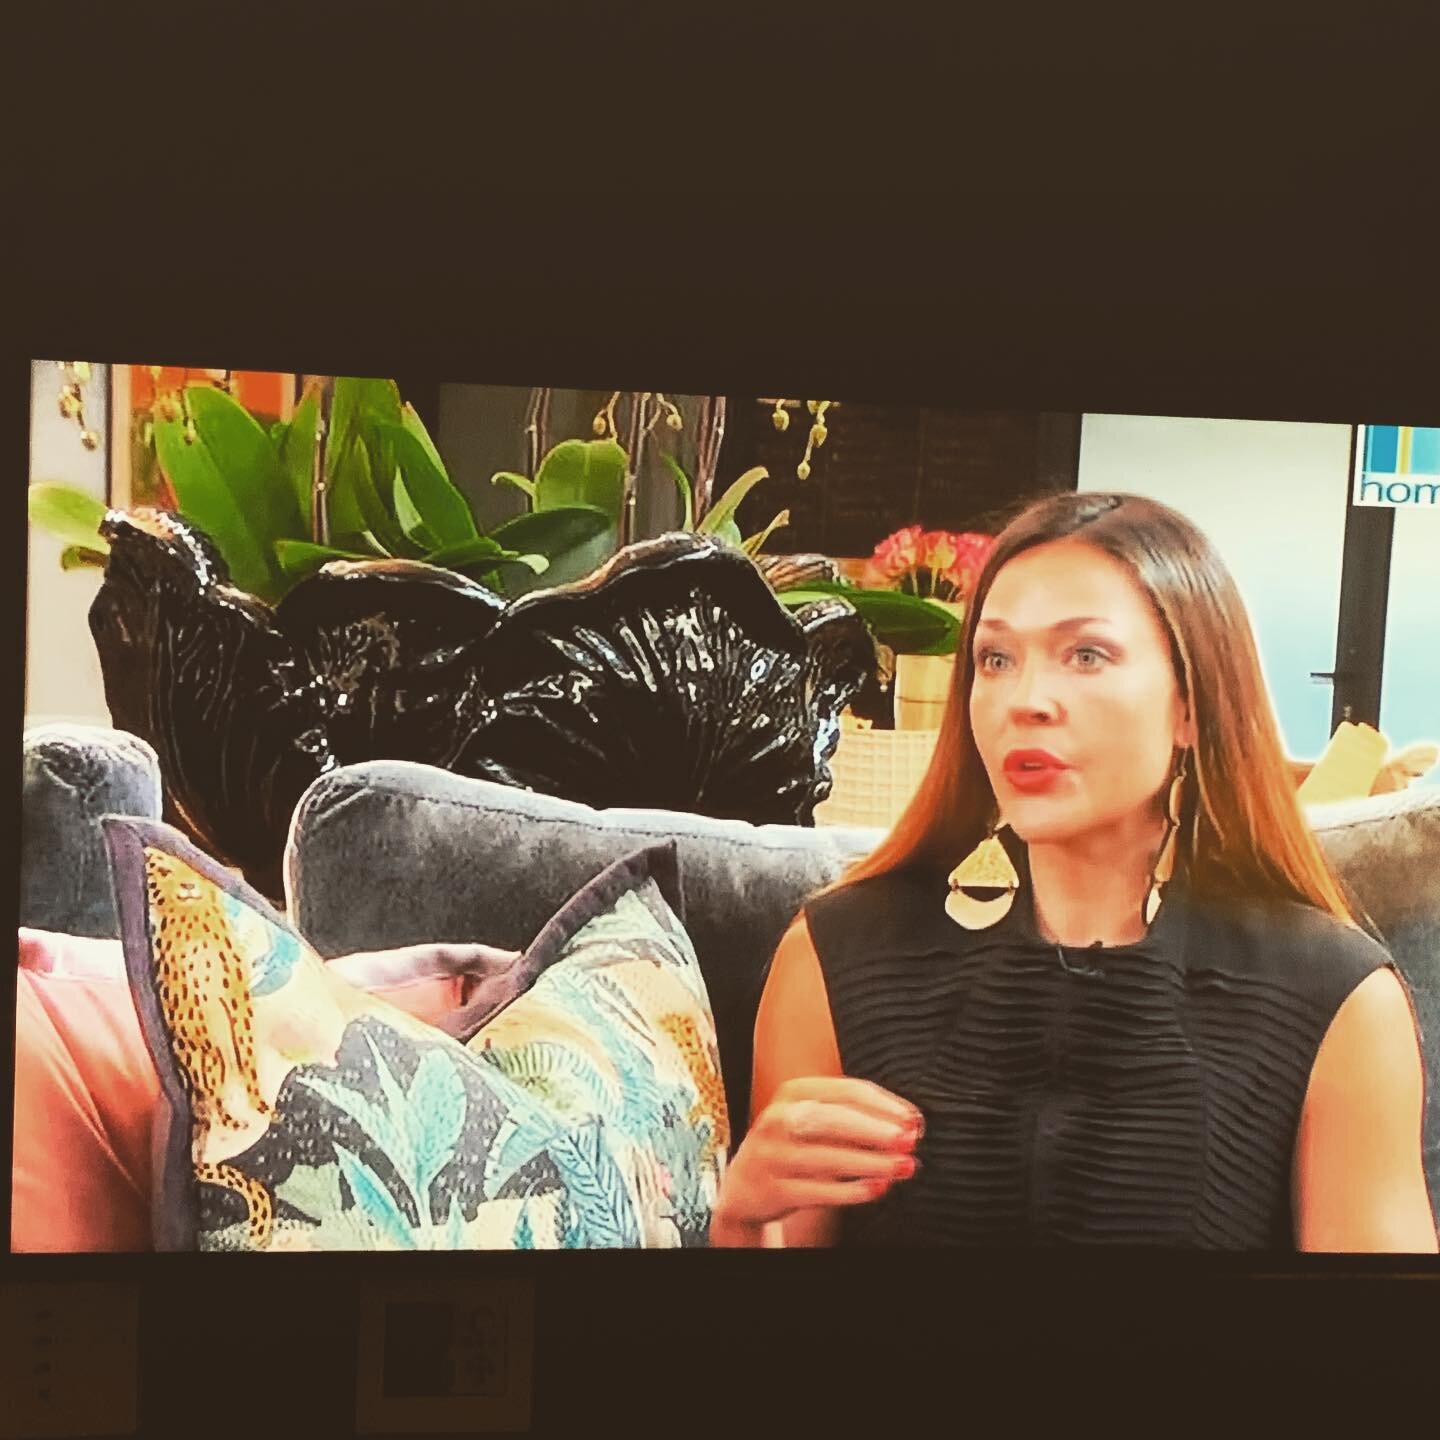 Contemporary K was on Design for you on the Home Channel. Watch or record the show on channel 176 Thursday 8:00, Friday 12:00, Saturday 15:00&amp;22:00, Sunday 10:30&amp;19:00 ✨